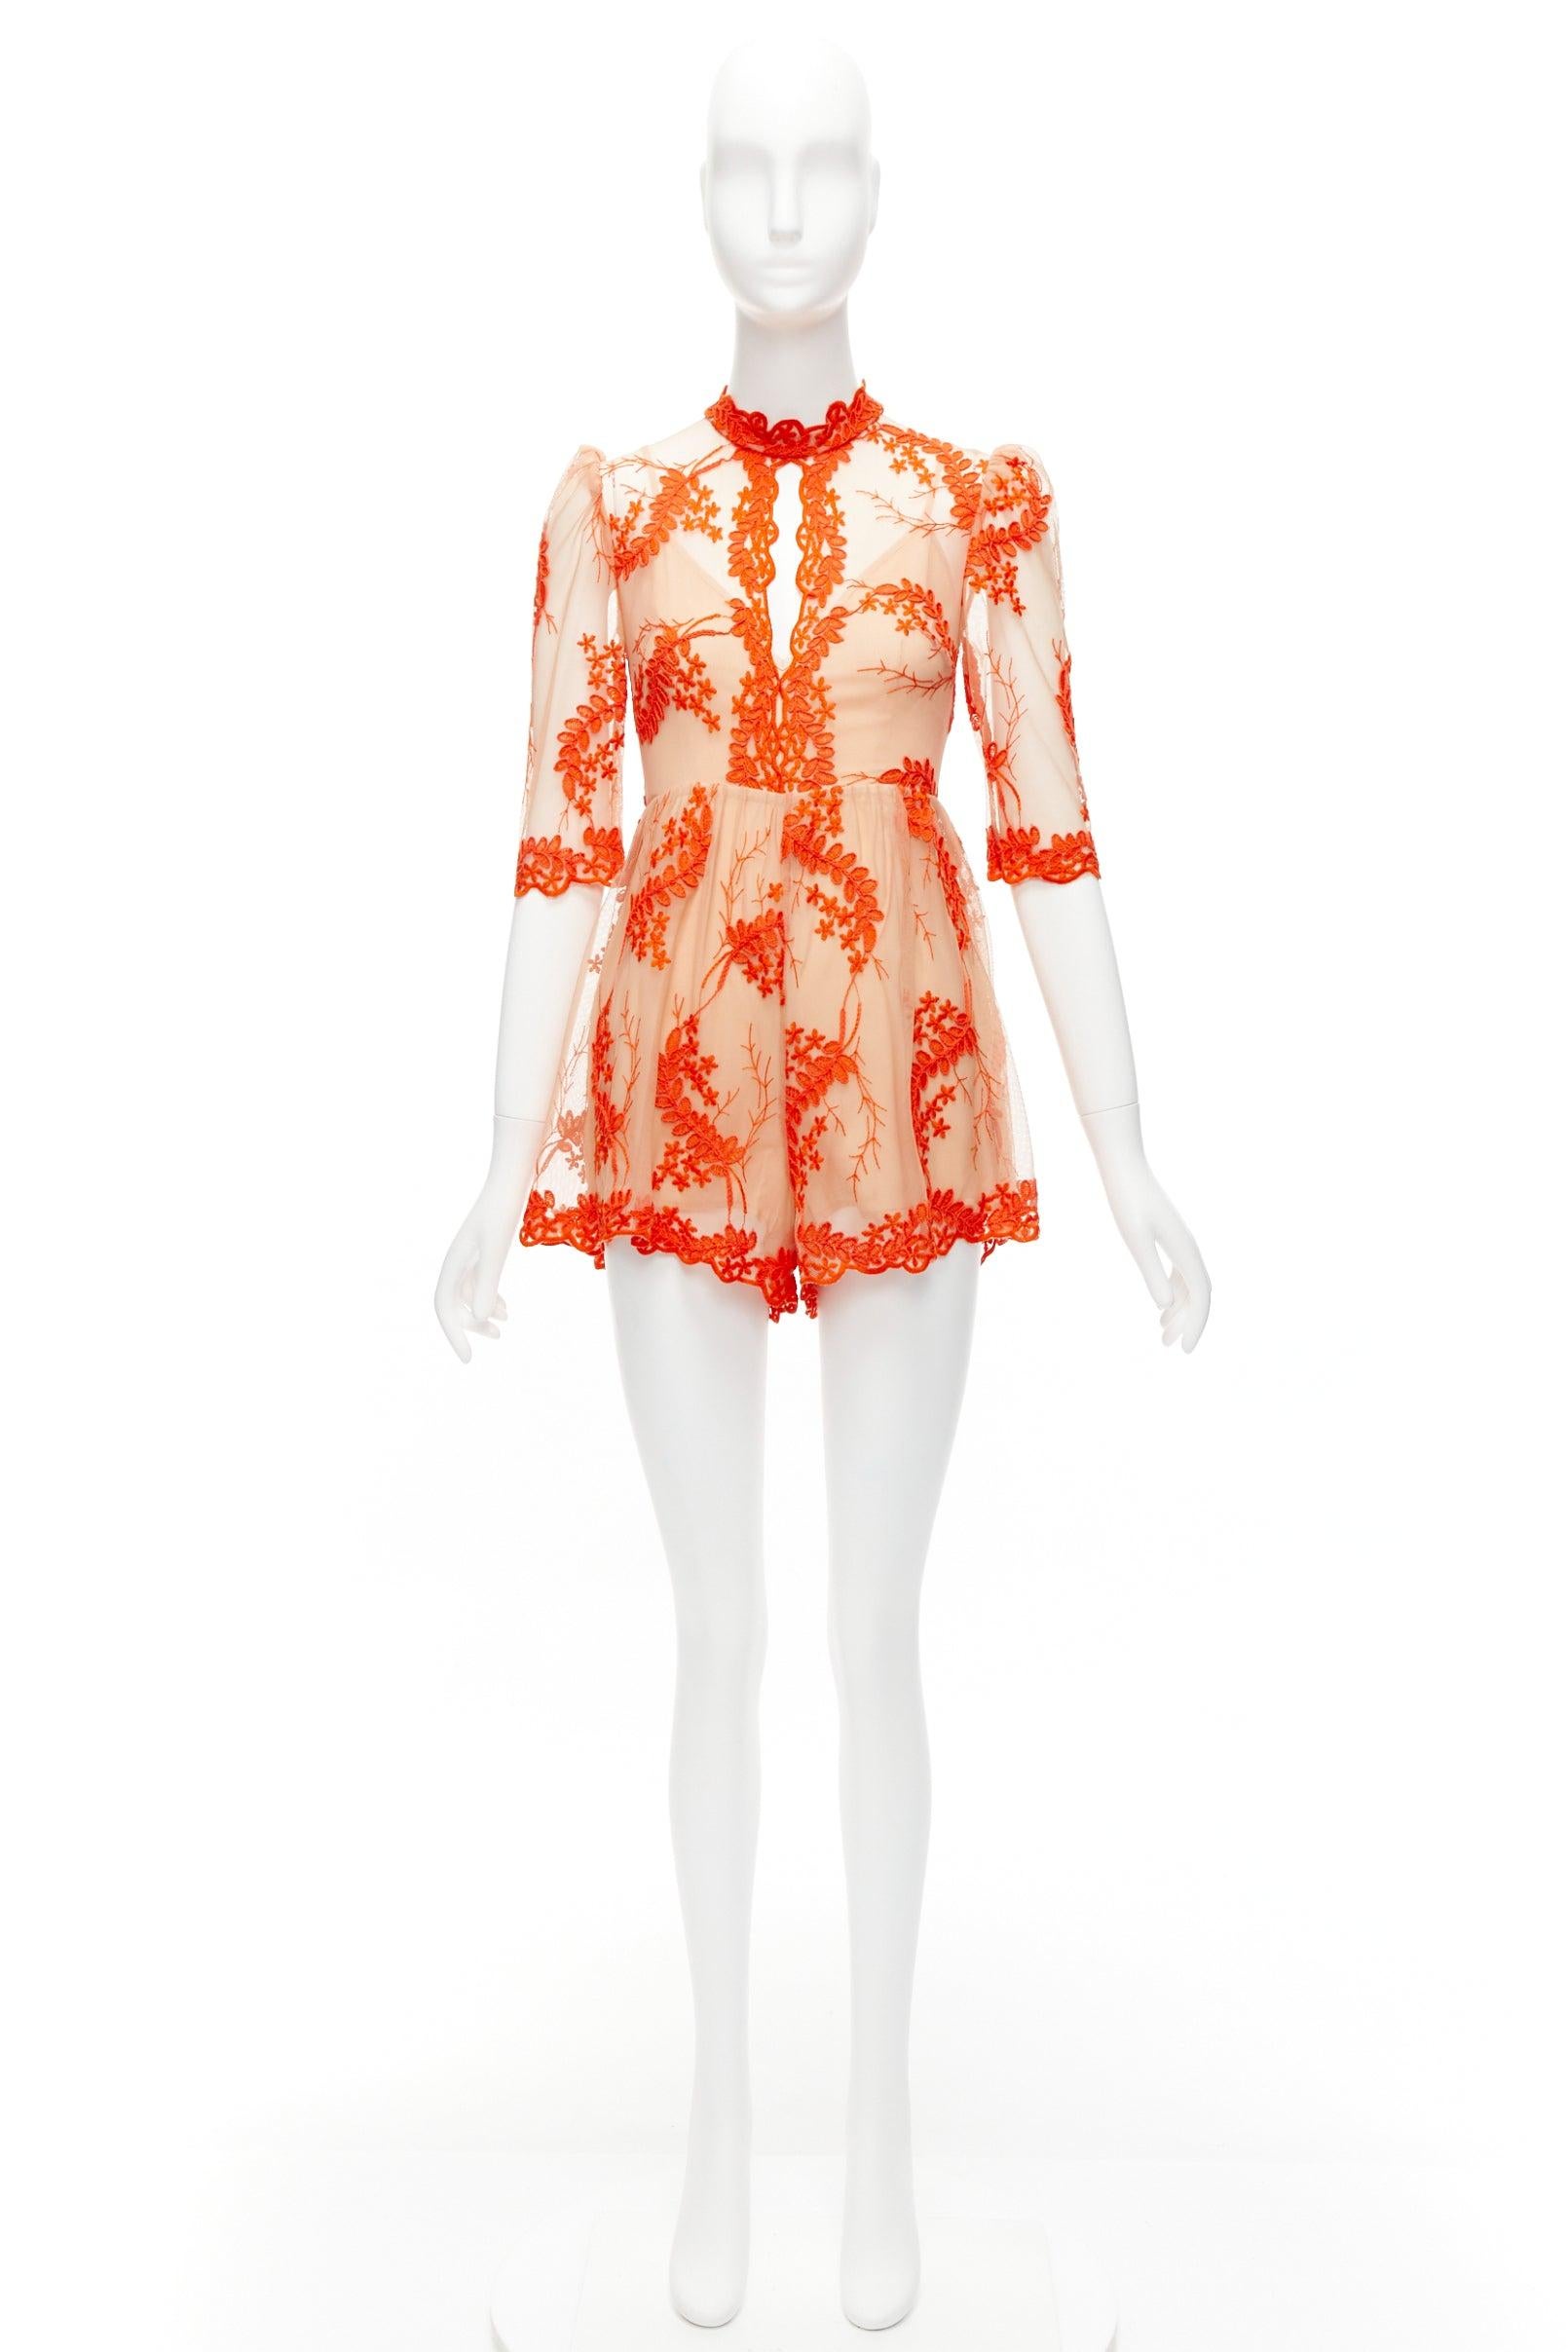 ALICE MCCALL Honeymoon orange lace nude sheer overlay lined romper US6 M For Sale 5